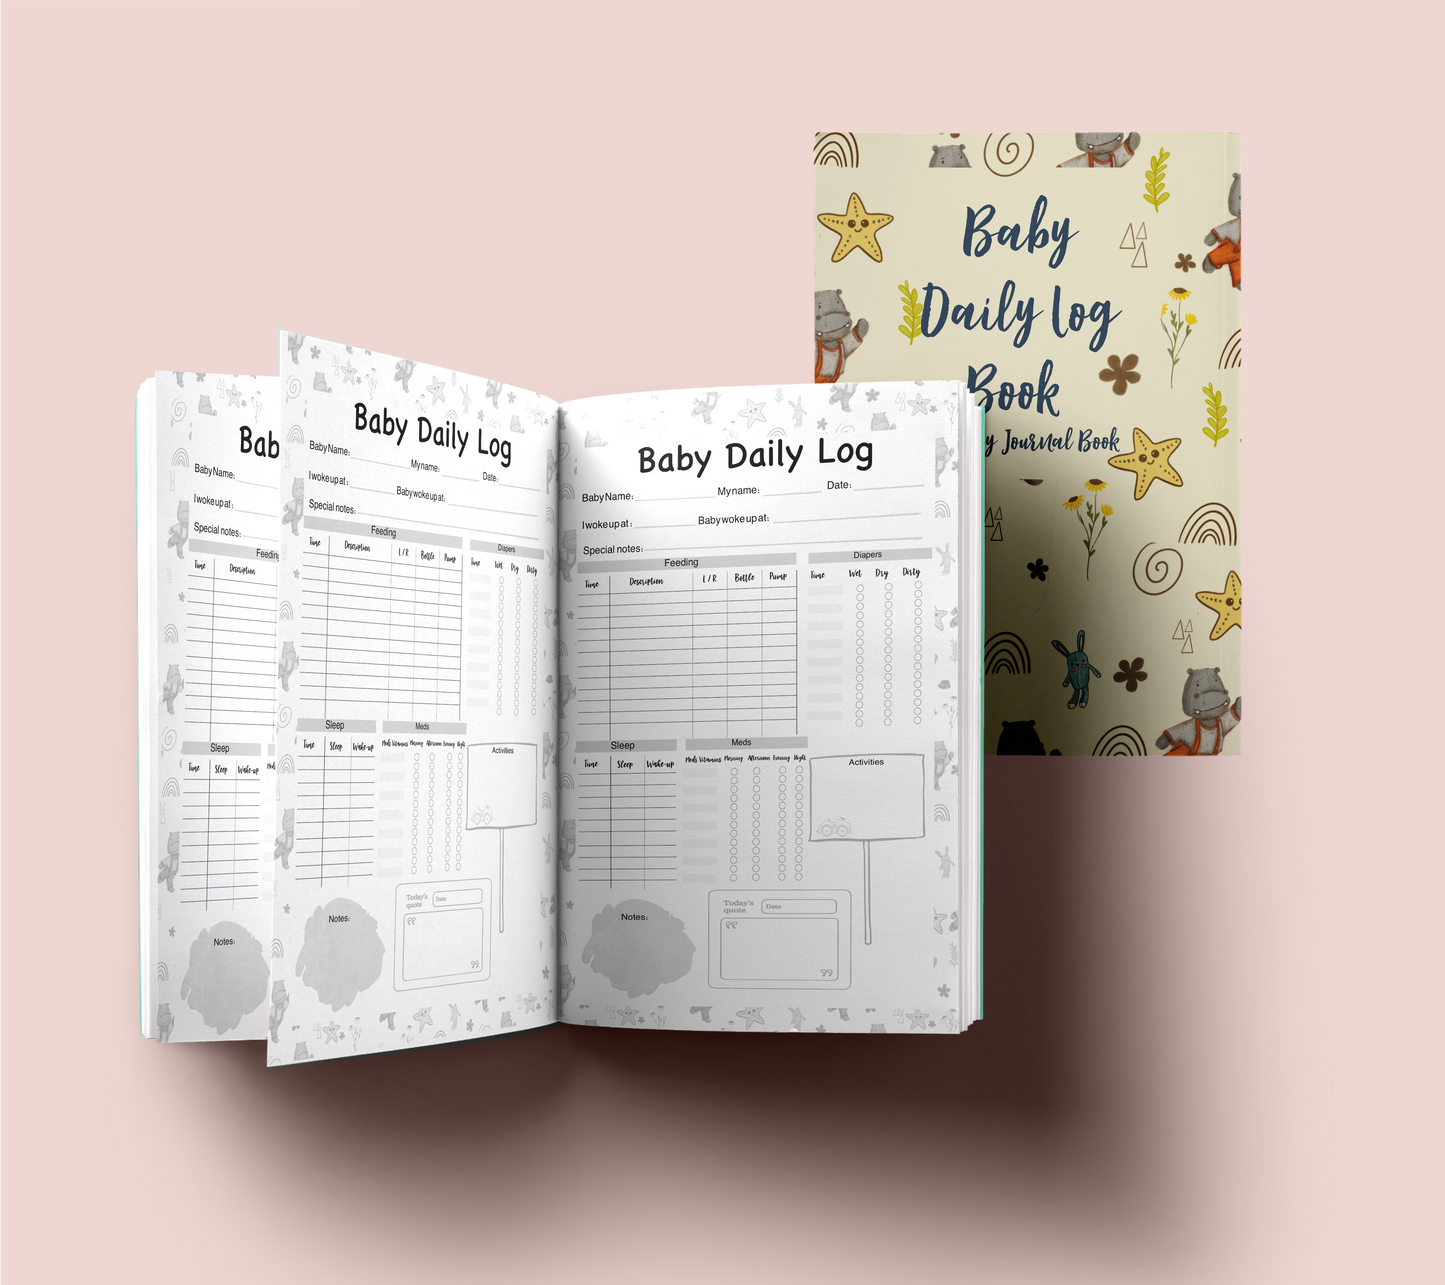 Little Munchkin: Baby daily log book a comprehensive nursing journal with baby feeding schedule chart